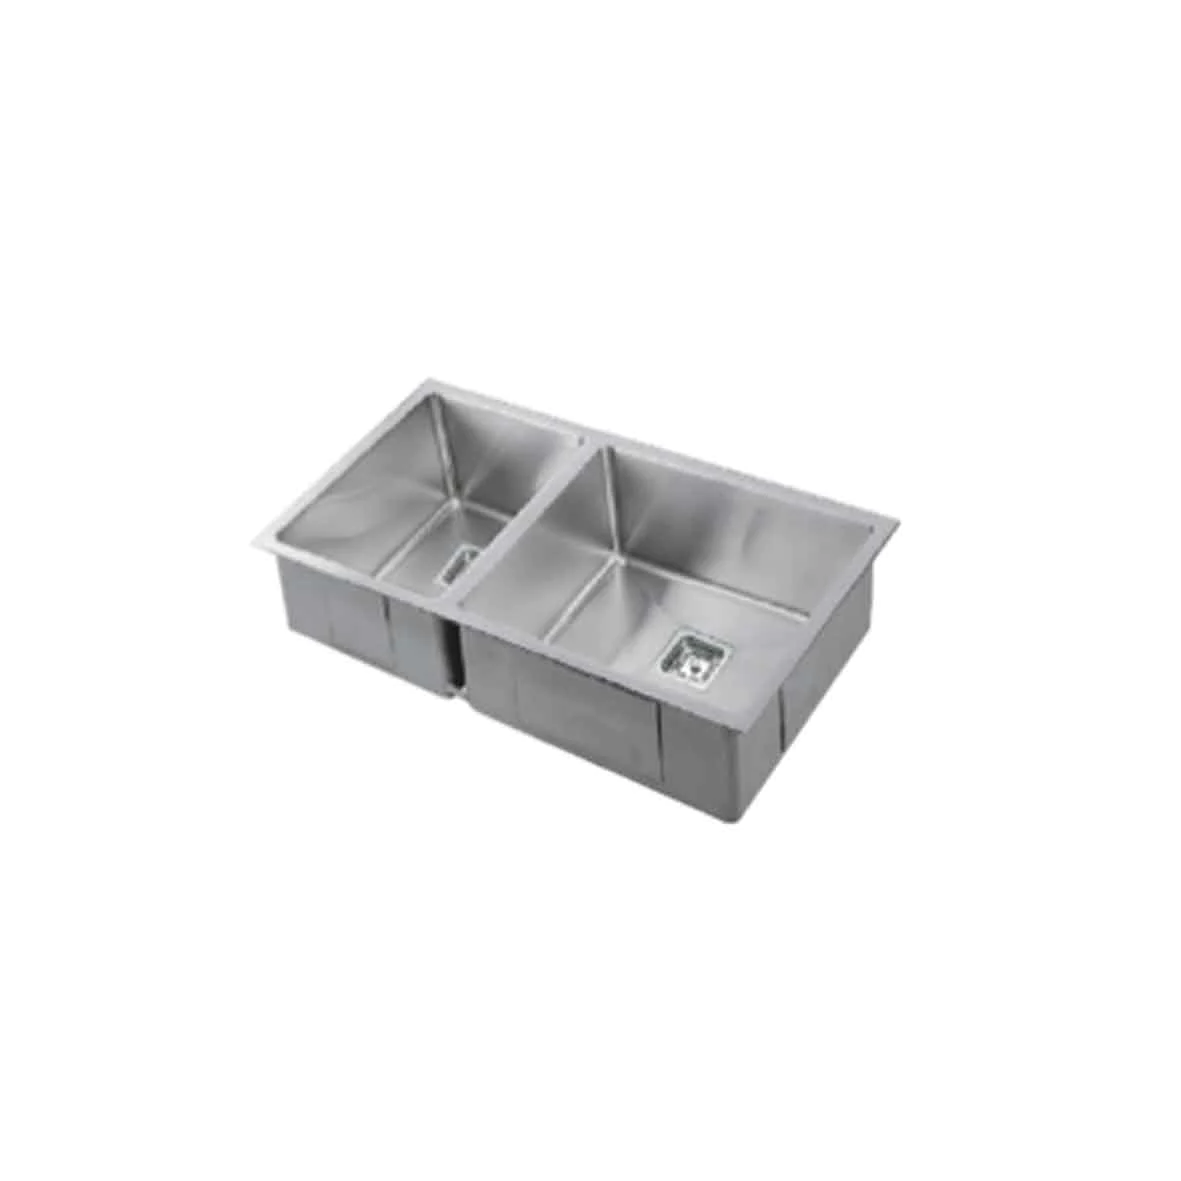 VEROTTI INOX 1 3/4 BOWL UNIVERSAL STAINLESS STEEL KITCHEN SINK 765MM (AVAILABLE IN LEFT OR RIGHT CONFIGURATION)